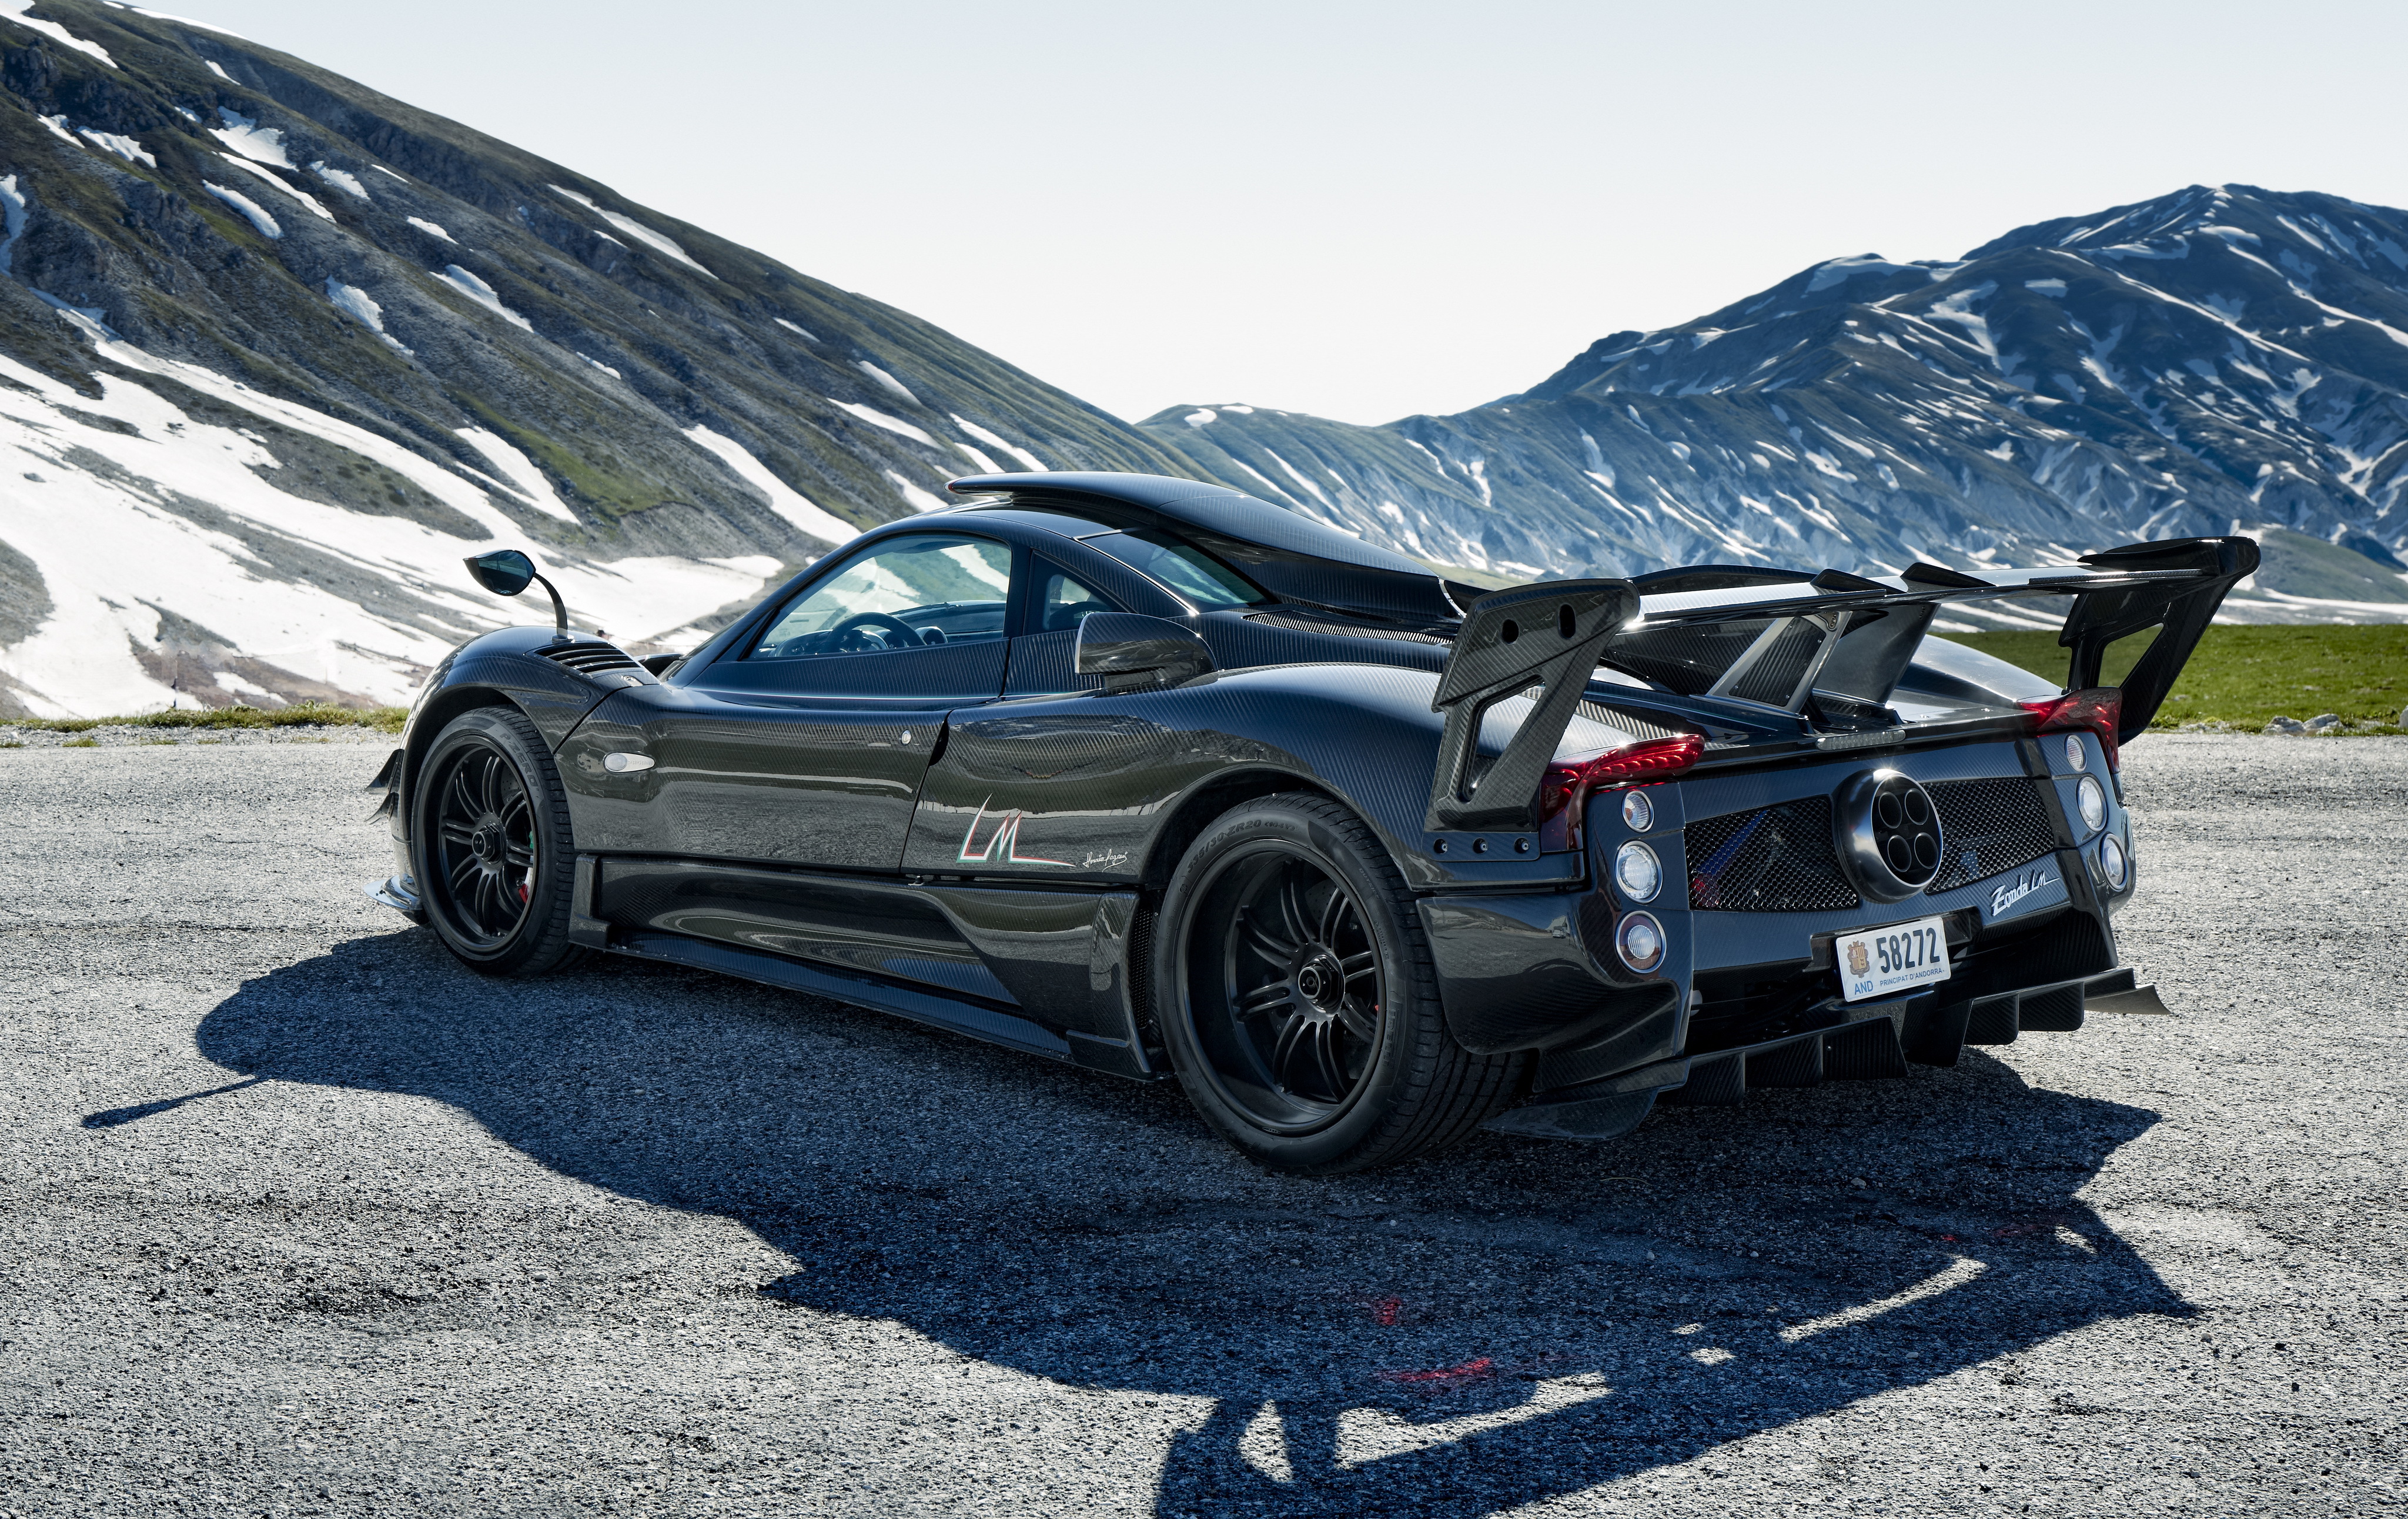 92818 download wallpaper pagani, cars, black, side view, zonda, 750 lm screensavers and pictures for free